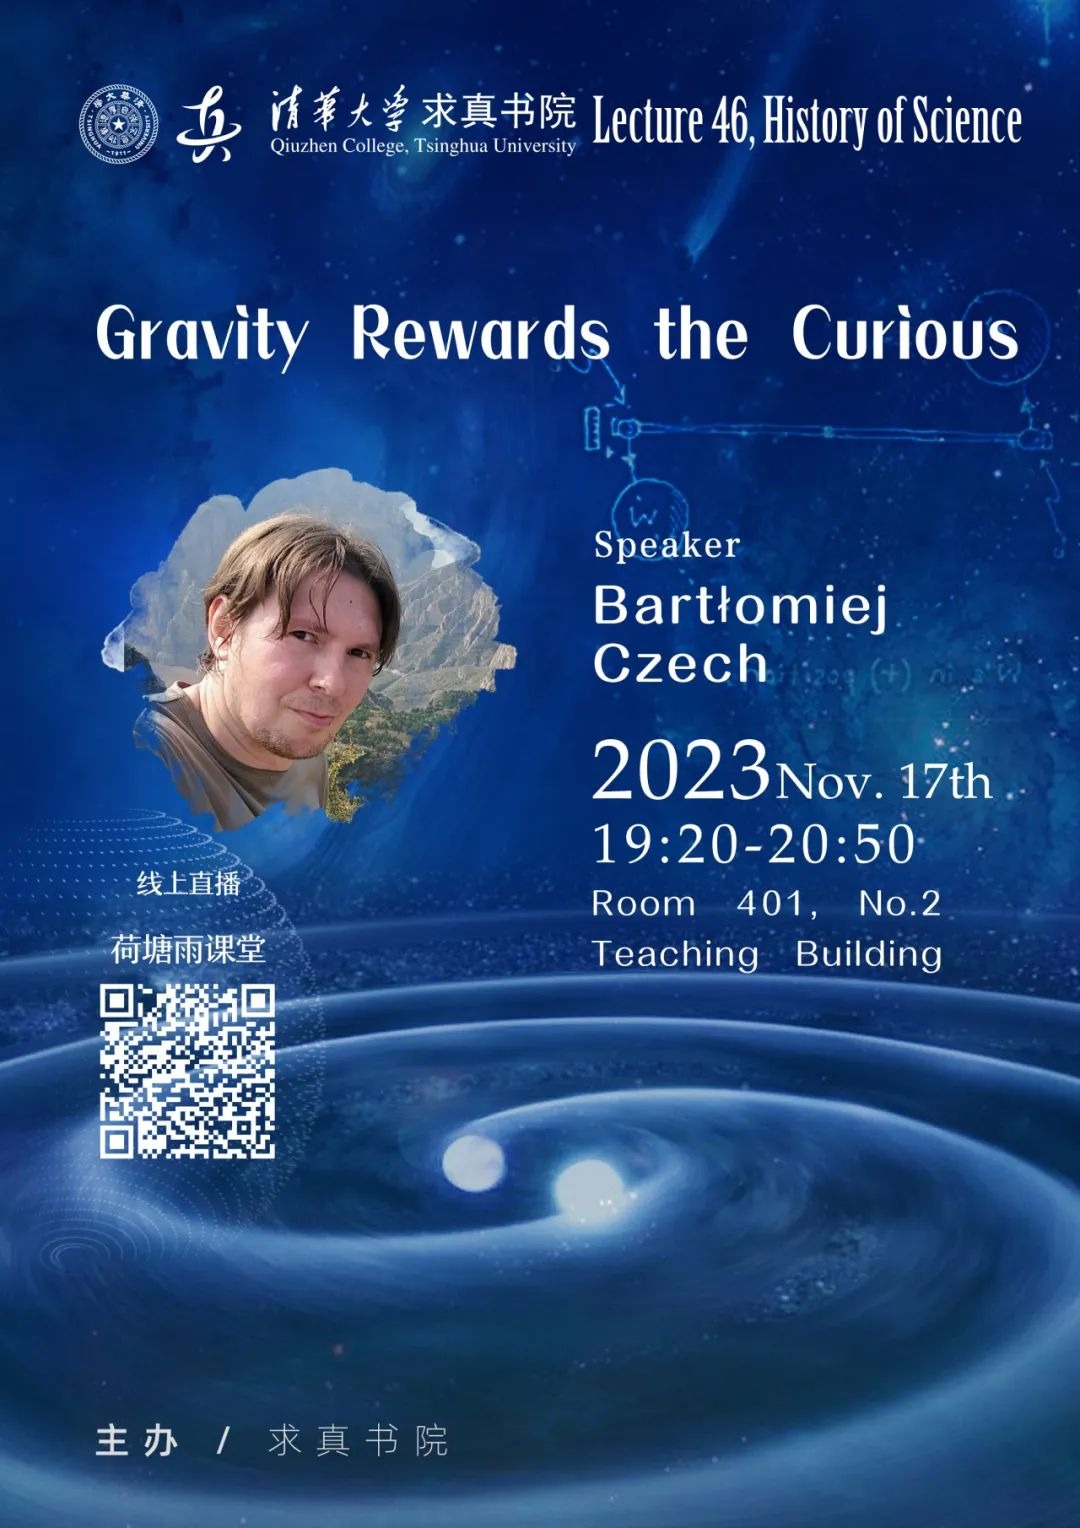 Lectures on History of Science – Lecture 46: Gravity Rewards the Curious